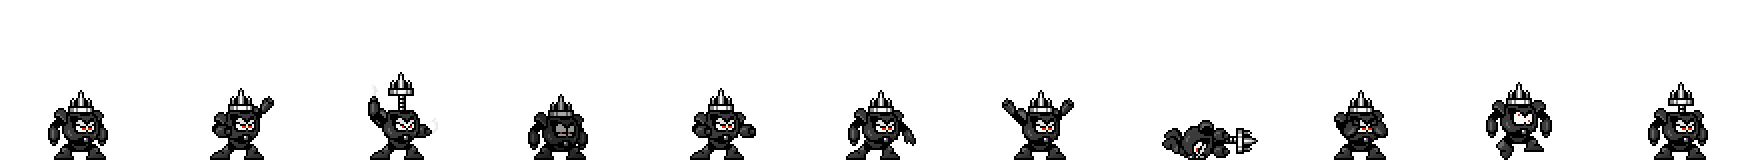 Needle Man (Darkness Alt) | Base Sprite Right<div style="margin-top: 4px; letting-spacing: 1px; font-size: 90%; font-family: Courier New; color: rgb(159, 150, 172);">[robot:right:base]{needle-man_alt9}</div>